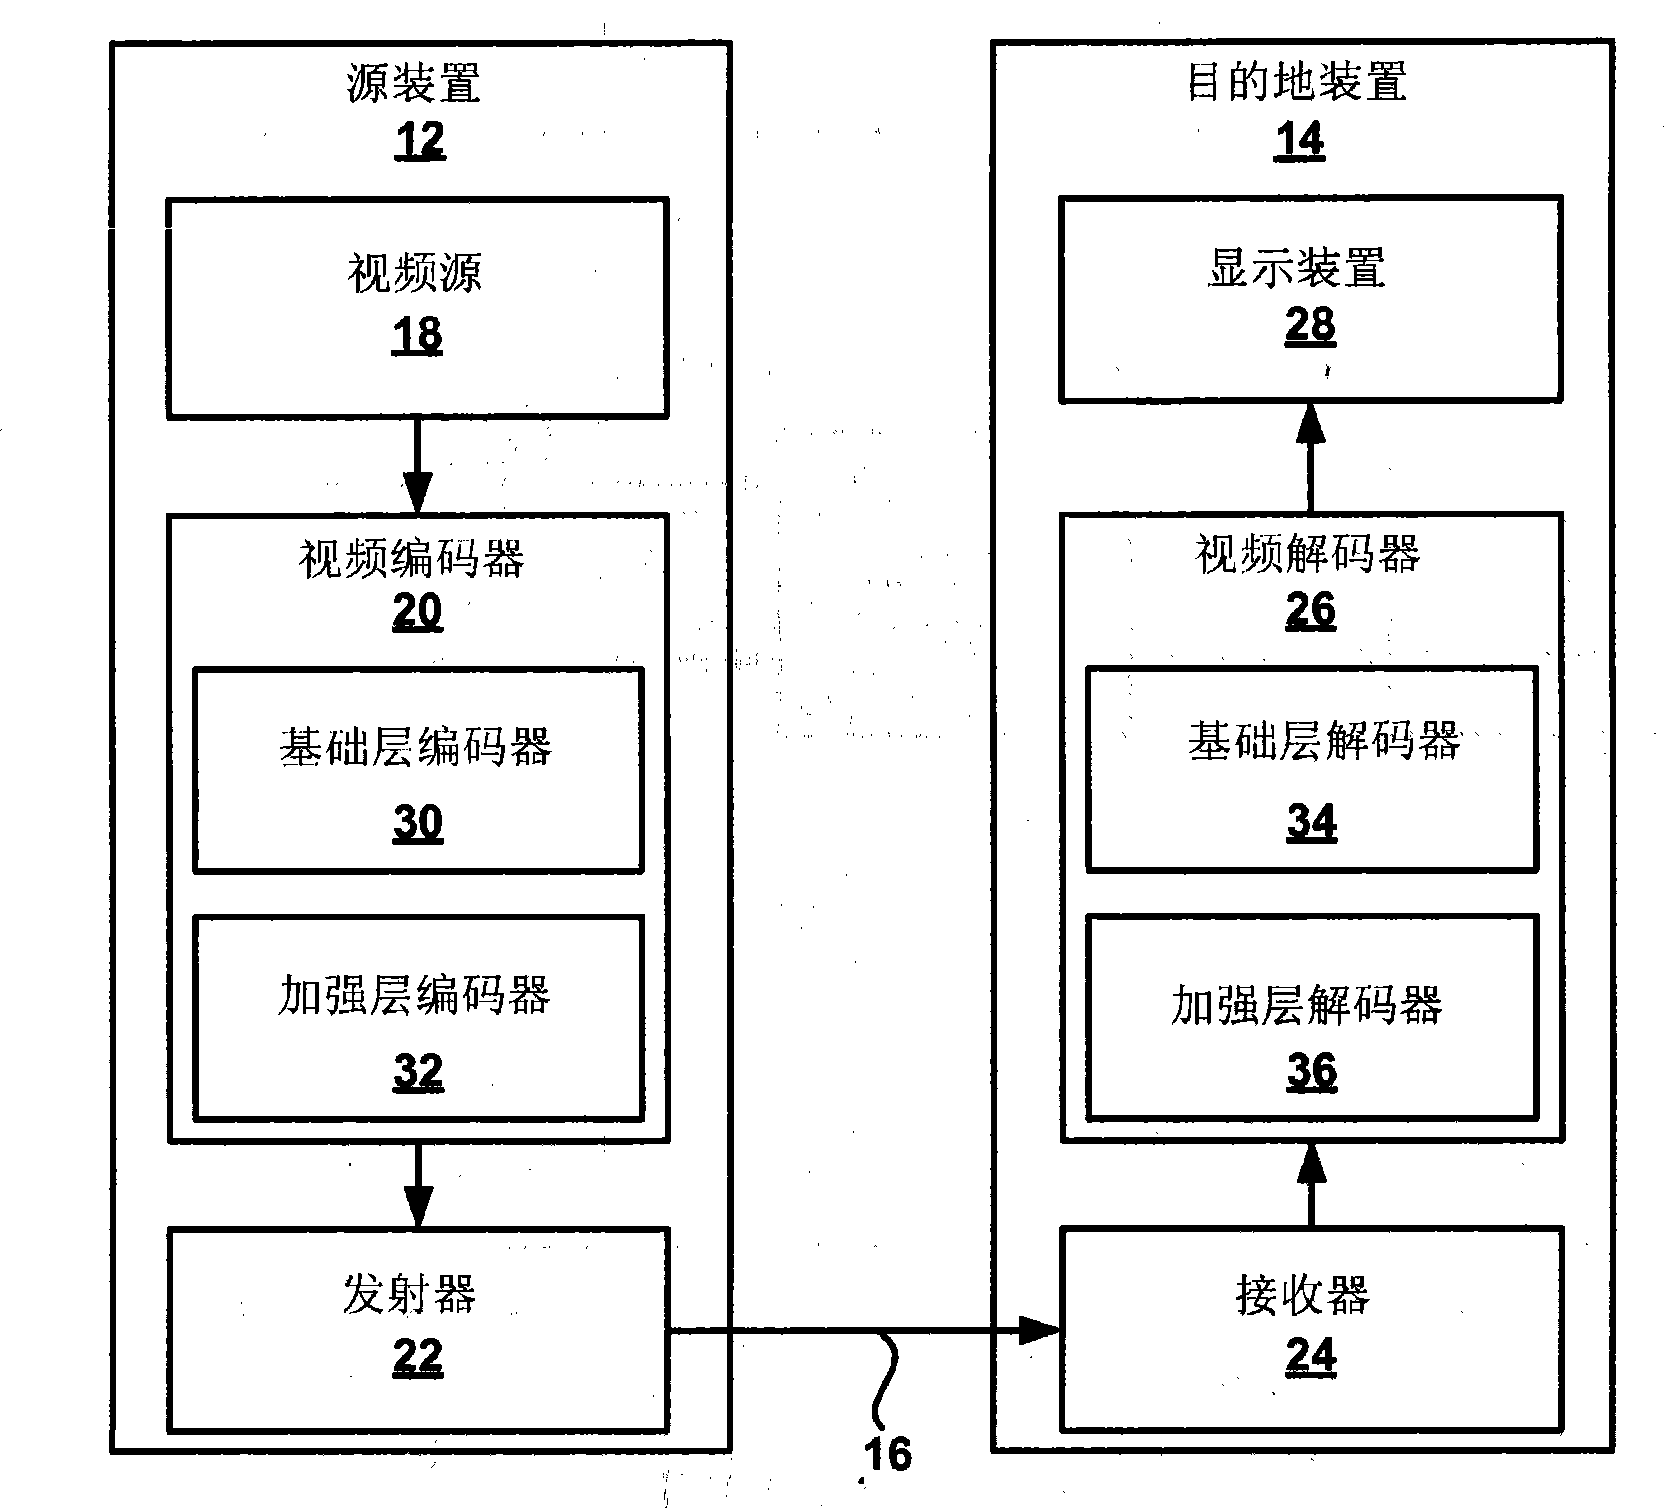 Improved enhancement layer coding for scalable video coding